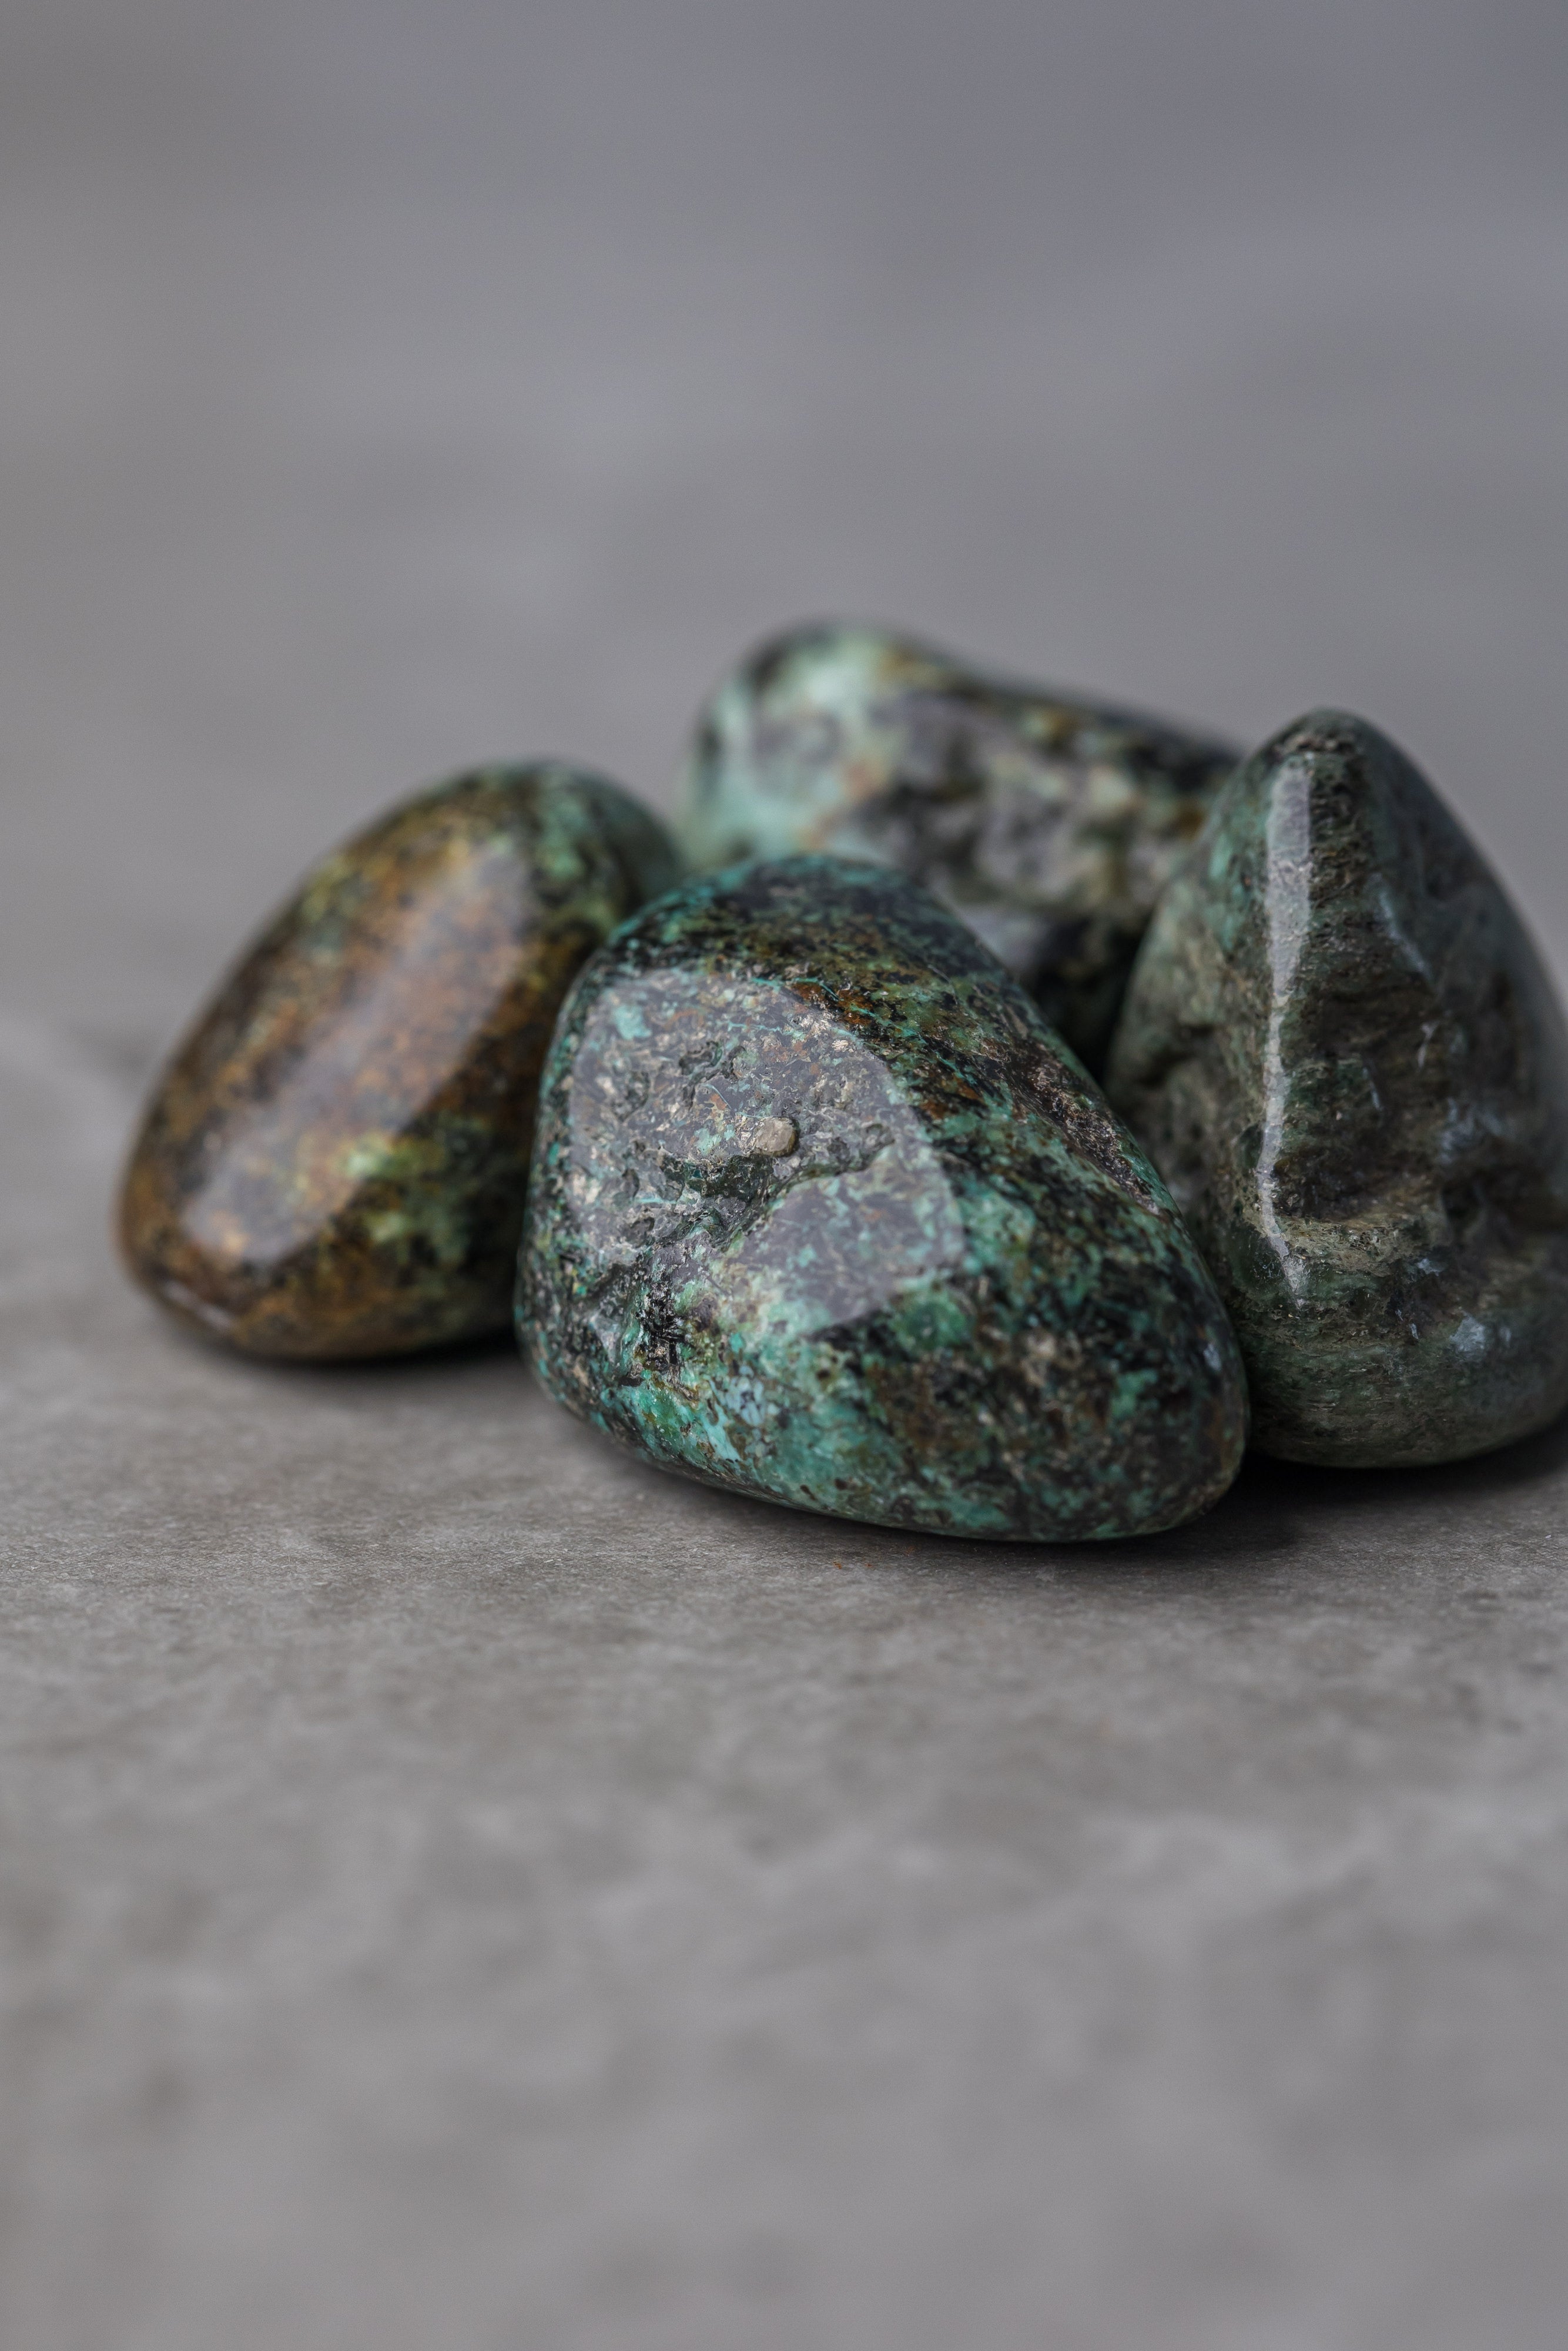 African Turquoise - Transformational Stone for Growth and Positivity - Everyday Rocks